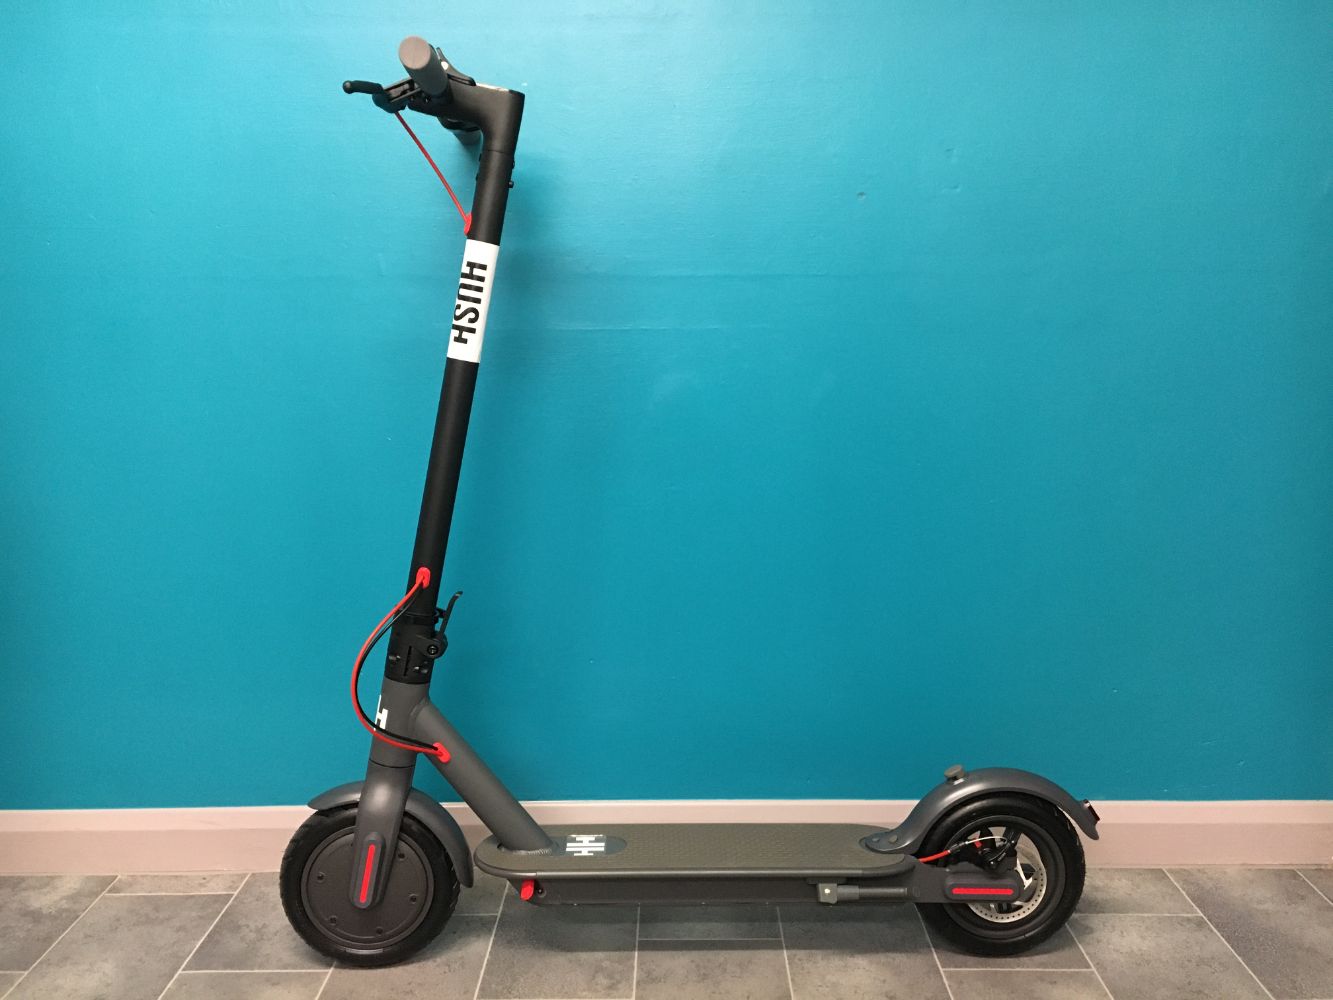 Brand New Electric Scooters by Hush: E-scooters Direct from Manufacturer - Battery-Powered, 3 Speeds, Foldable